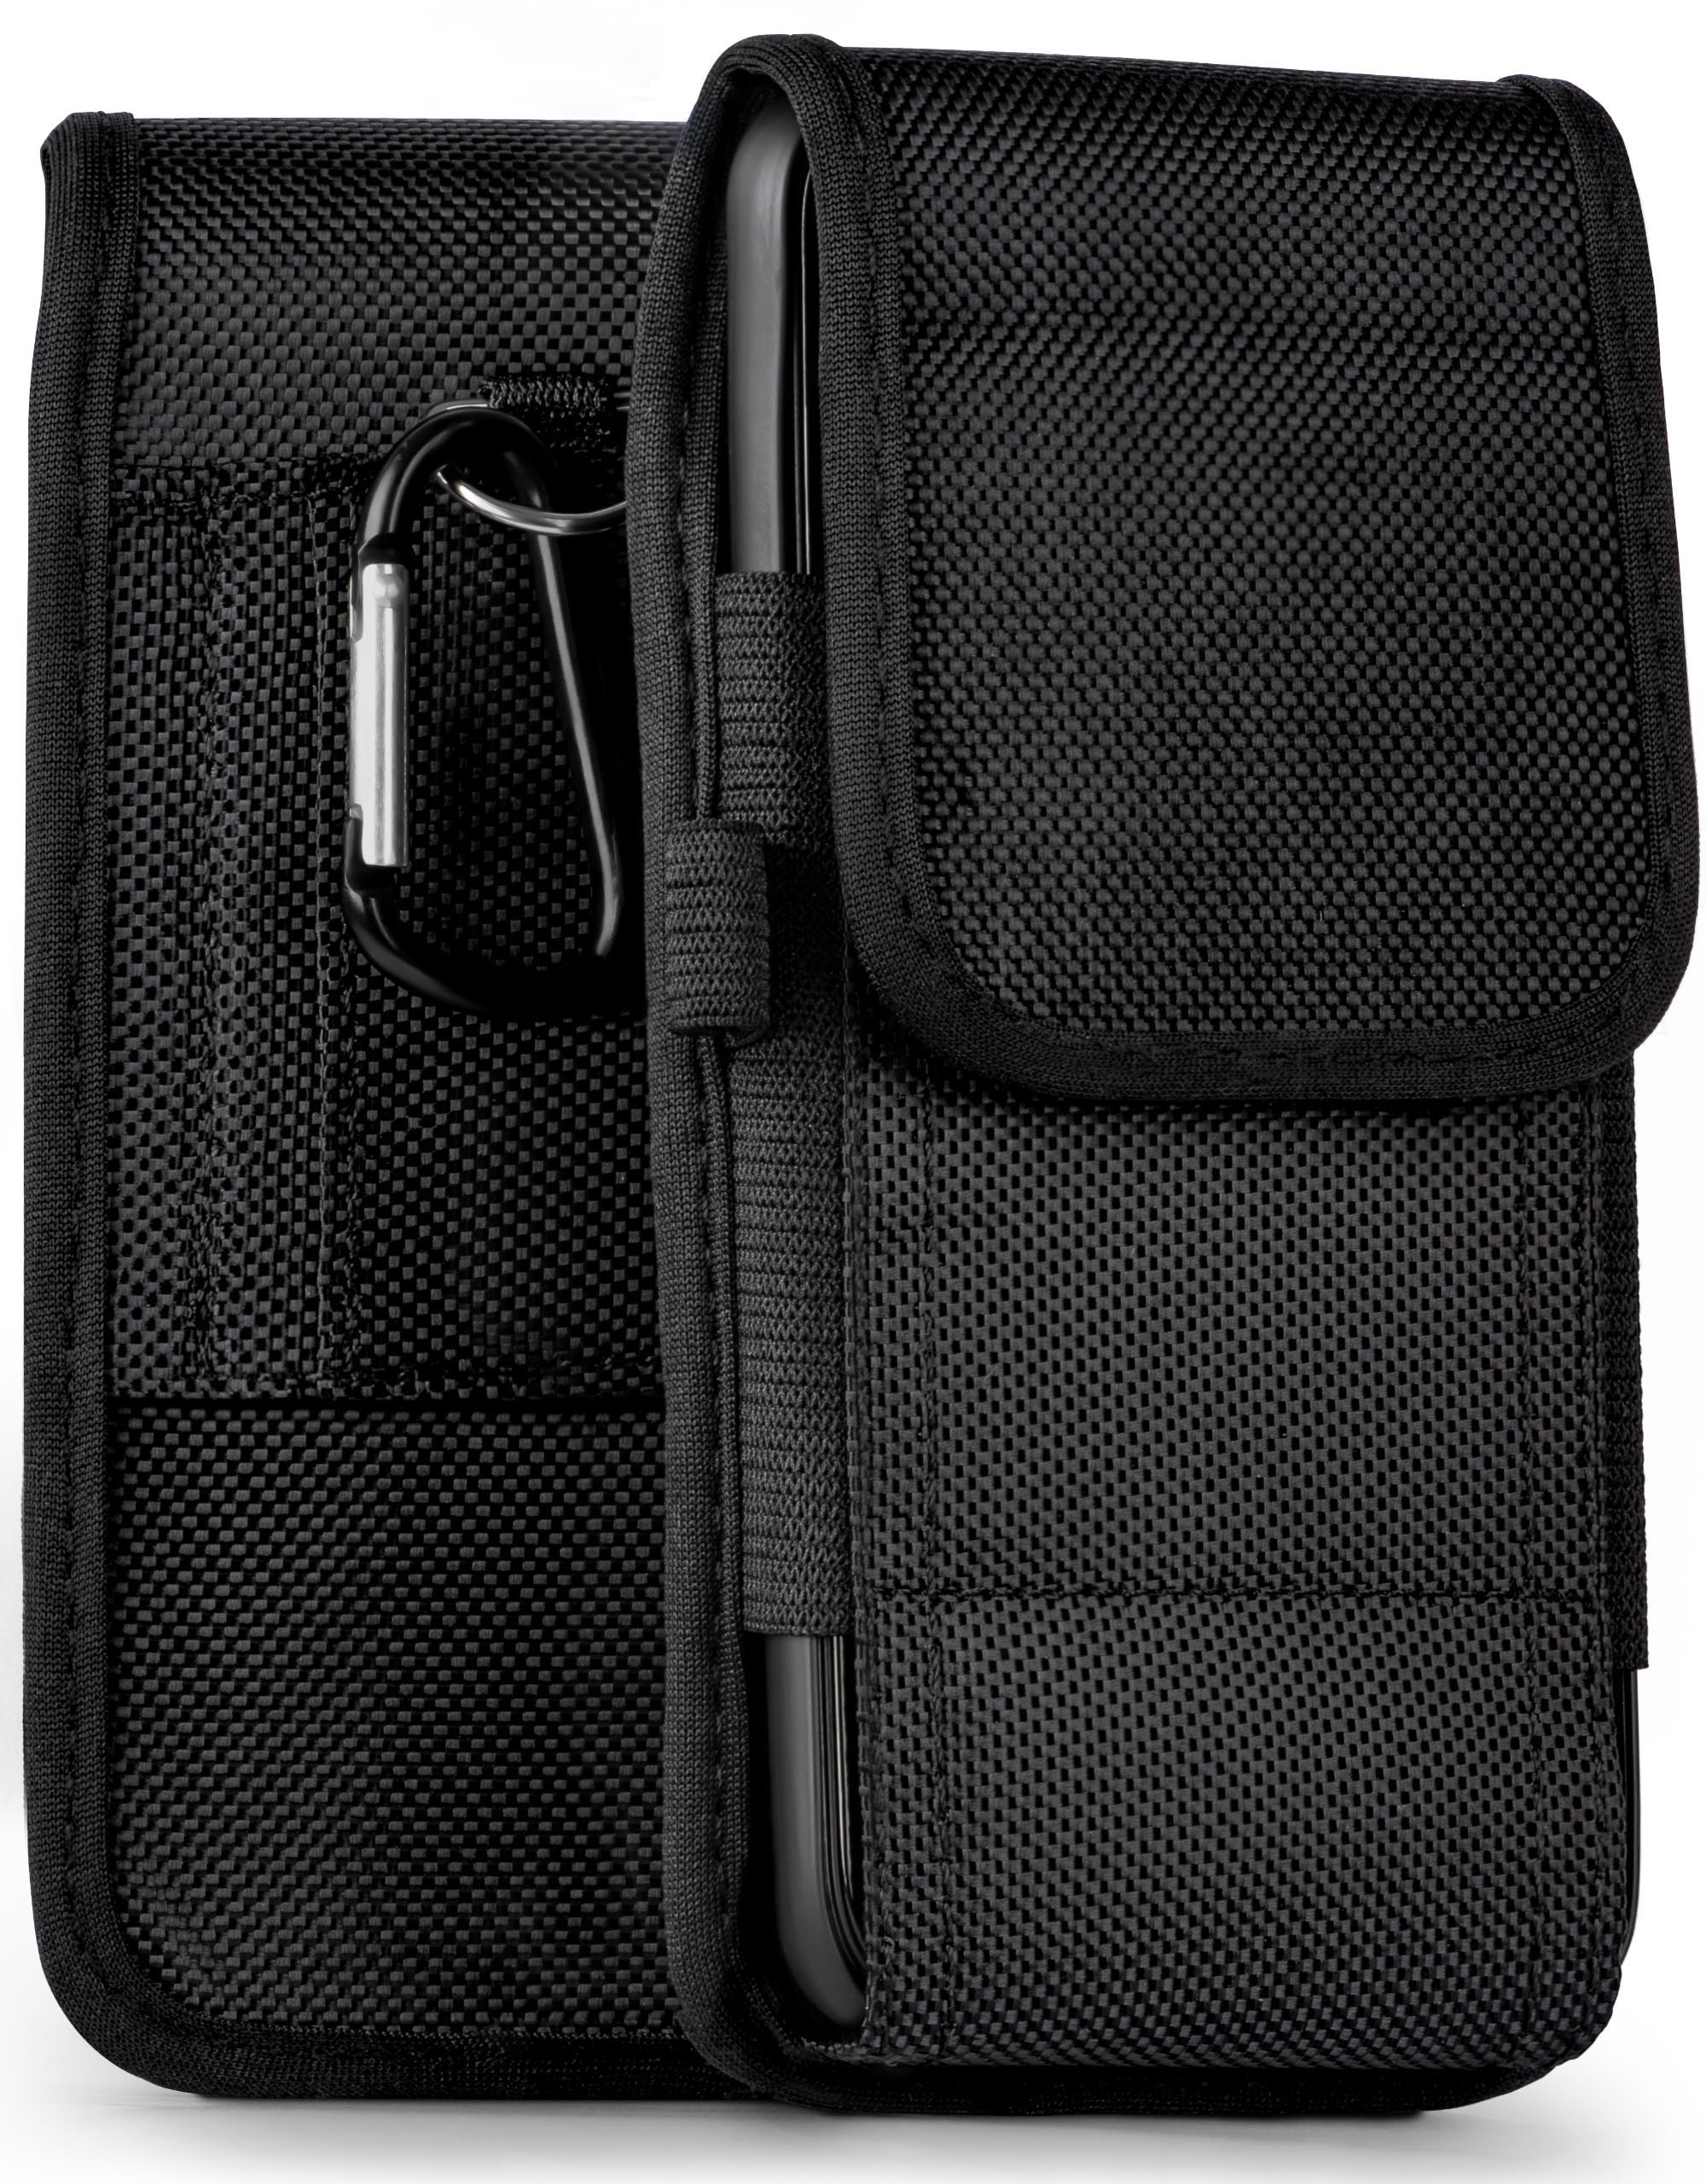 Trail MOEX Case, Holster, R15, Agility Cubot,